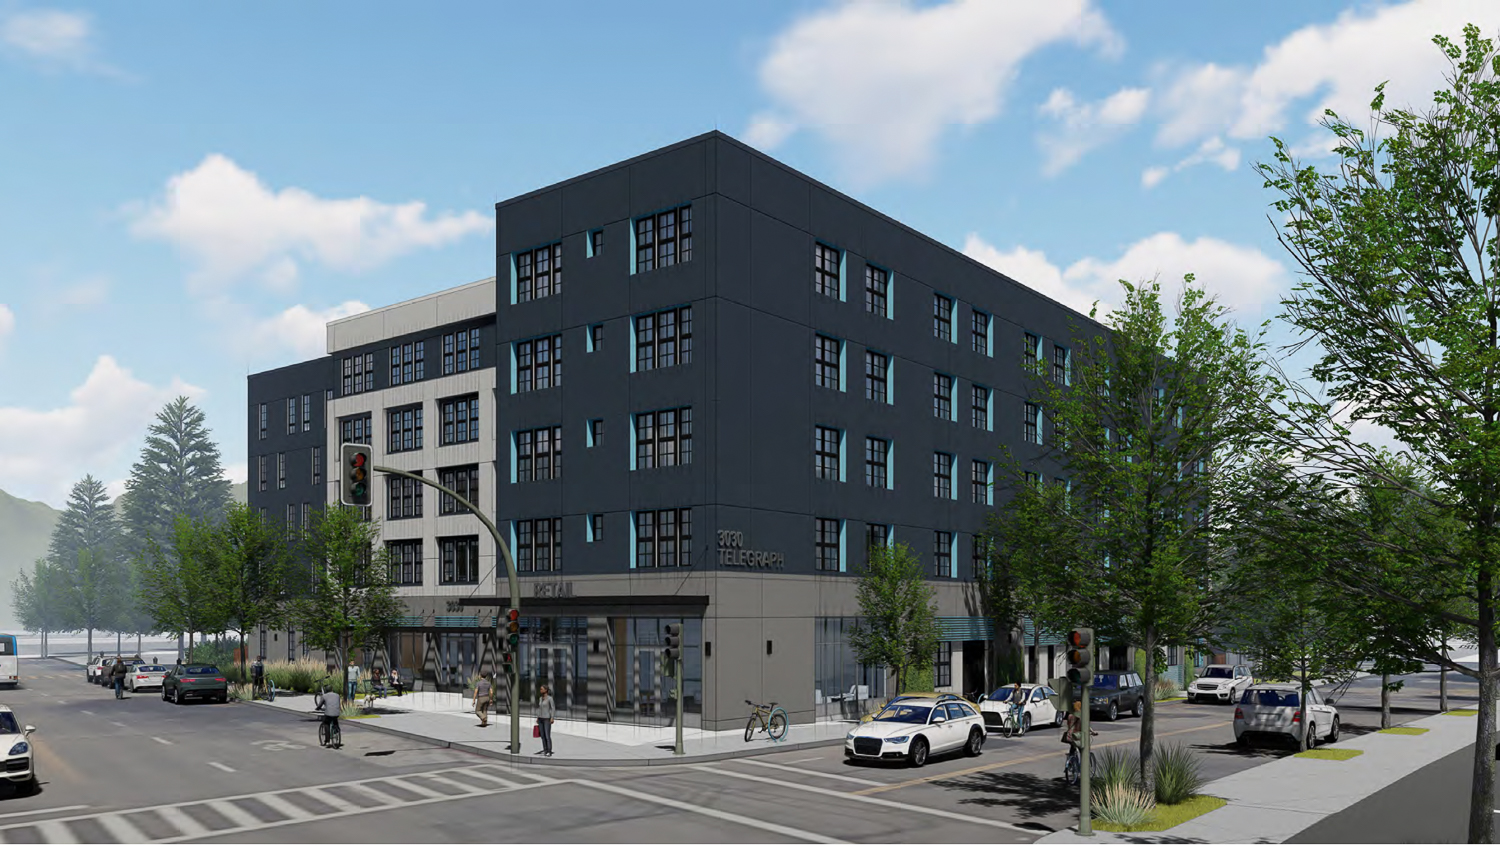 3030 Telegraph Avenue corner view from Telegraph and Webster Street, rendering by Left Coast Architecture